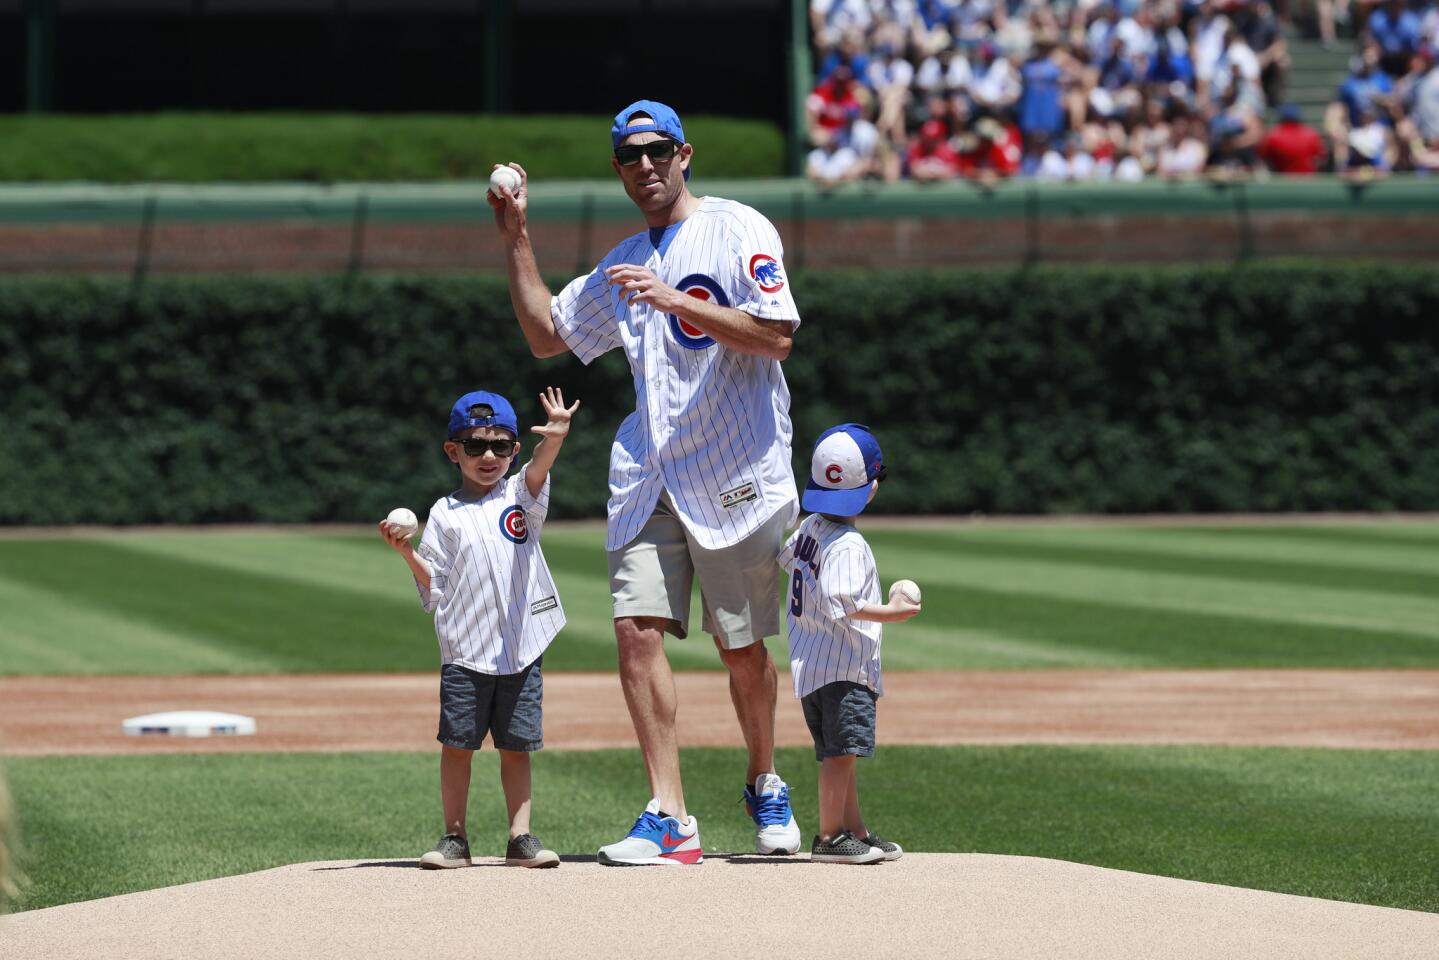 Former Bears kicker Robbie Gould, throws out the ceremonial first pitch before a Cubs-Reds game at Wrigley Field on July 7, 2018. With him are his two sons Griffin, 4, and Gavin, 3.